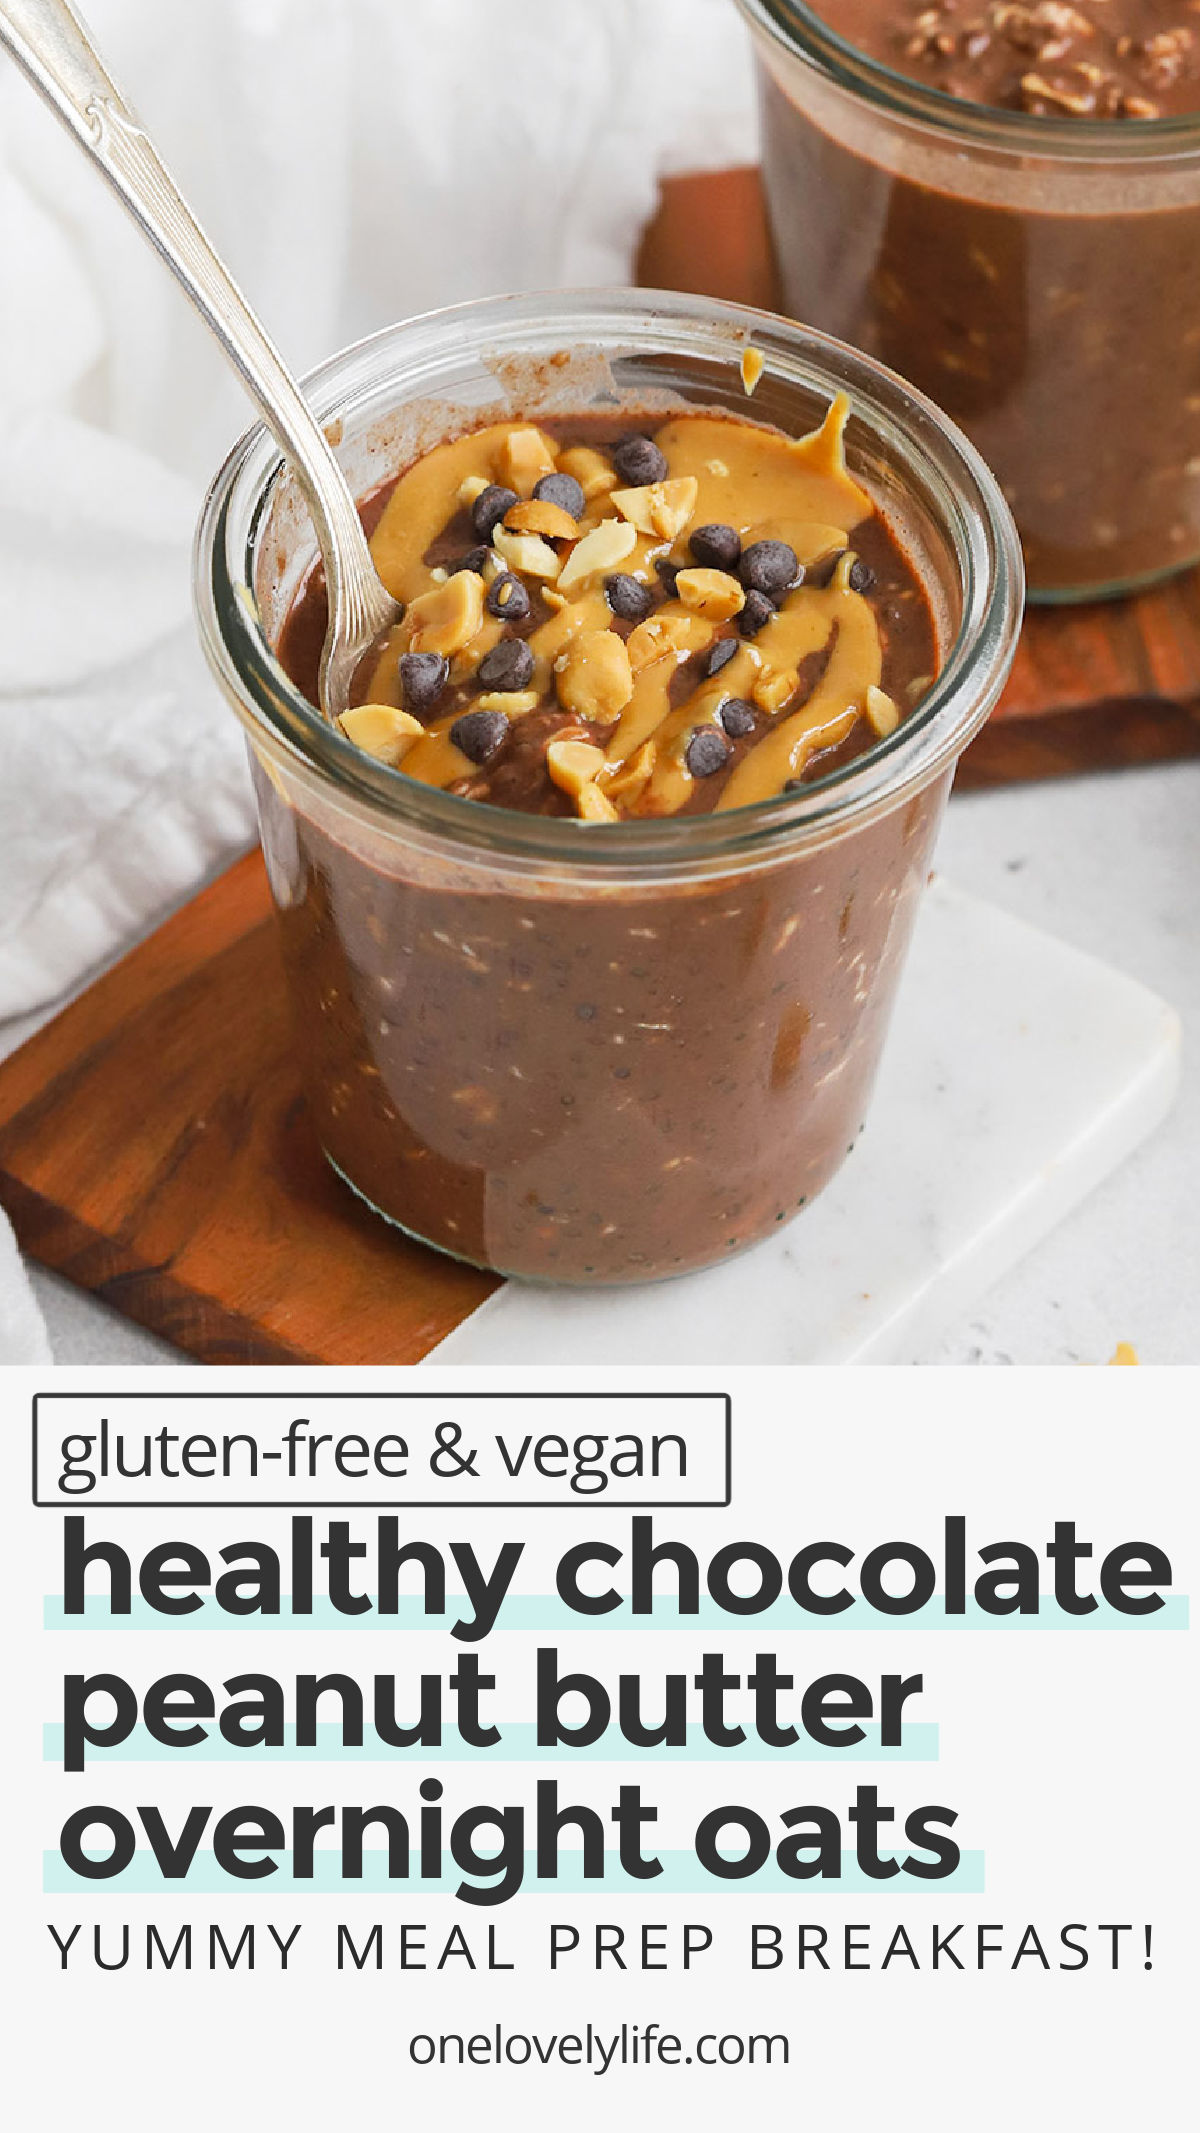 Healthy Chocolate Peanut Butter Overnight Oats - Wake up to a yummy meal prep breakfast with our peanut butter chocolate overnight oats recipe! It's delicious & easy to make in advance. (Gluten-Free, Vegan) / peanut butter overnight oats recipe / healthy breakfast / vegan breakfast / gluten-free breakfast / make ahead breakfast / grab and go breakfast / chocolate peanut butter oatmeal / chocolate peanut butter overnight oats without yogurt / chocolate peanut butter banana overnight oats